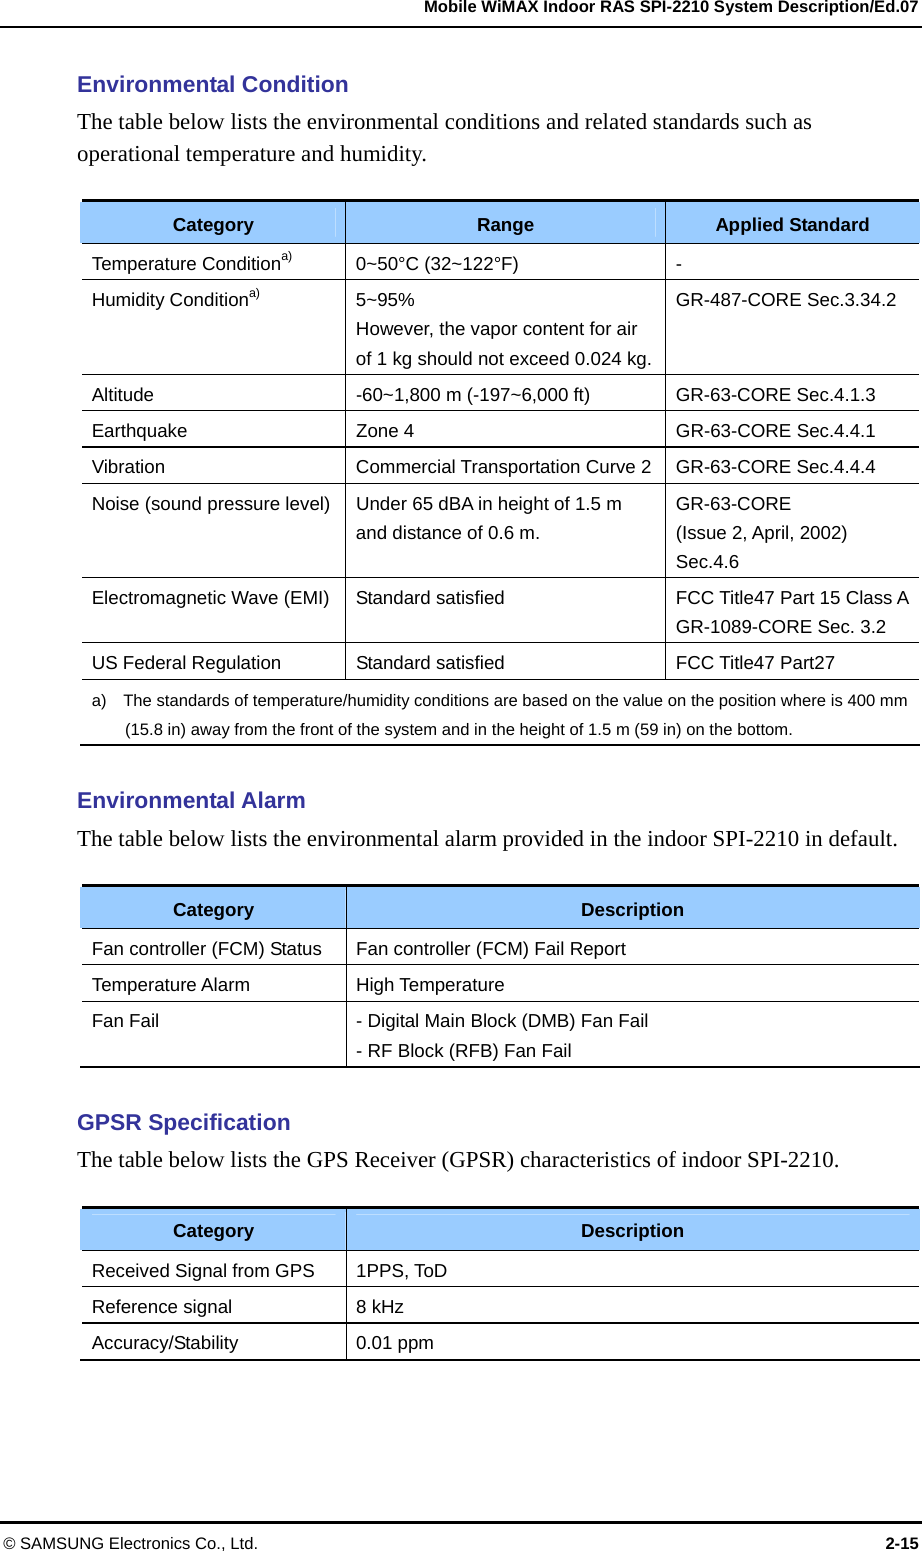   Mobile WiMAX Indoor RAS SPI-2210 System Description/Ed.07 © SAMSUNG Electronics Co., Ltd.  2-15 Environmental Condition The table below lists the environmental conditions and related standards such as operational temperature and humidity.  Category Range Applied Standard Temperature Conditiona) 0~50°C (32~122°F)  - Humidity Conditiona) 5~95% However, the vapor content for air of 1 kg should not exceed 0.024 kg.GR-487-CORE Sec.3.34.2 Altitude -60~1,800 m (-197~6,000 ft) GR-63-CORE Sec.4.1.3 Earthquake Zone 4  GR-63-CORE Sec.4.4.1 Vibration Commercial Transportation Curve 2 GR-63-CORE Sec.4.4.4 Noise (sound pressure level)  Under 65 dBA in height of 1.5 m and distance of 0.6 m. GR-63-CORE (Issue 2, April, 2002) Sec.4.6 Electromagnetic Wave (EMI)  Standard satisfied FCC Title47 Part 15 Class AGR-1089-CORE Sec. 3.2 US Federal Regulation  Standard satisfied FCC Title47 Part27 a)    The standards of temperature/humidity conditions are based on the value on the position where is 400 mm (15.8 in) away from the front of the system and in the height of 1.5 m (59 in) on the bottom.  Environmental Alarm The table below lists the environmental alarm provided in the indoor SPI-2210 in default.  Category Description Fan controller (FCM) Status Fan controller (FCM) Fail Report Temperature Alarm  High Temperature Fan Fail  - Digital Main Block (DMB) Fan Fail - RF Block (RFB) Fan Fail  GPSR Specification The table below lists the GPS Receiver (GPSR) characteristics of indoor SPI-2210.  Category Description Received Signal from GPS  1PPS, ToD Reference signal  8 kHz Accuracy/Stability 0.01 ppm  